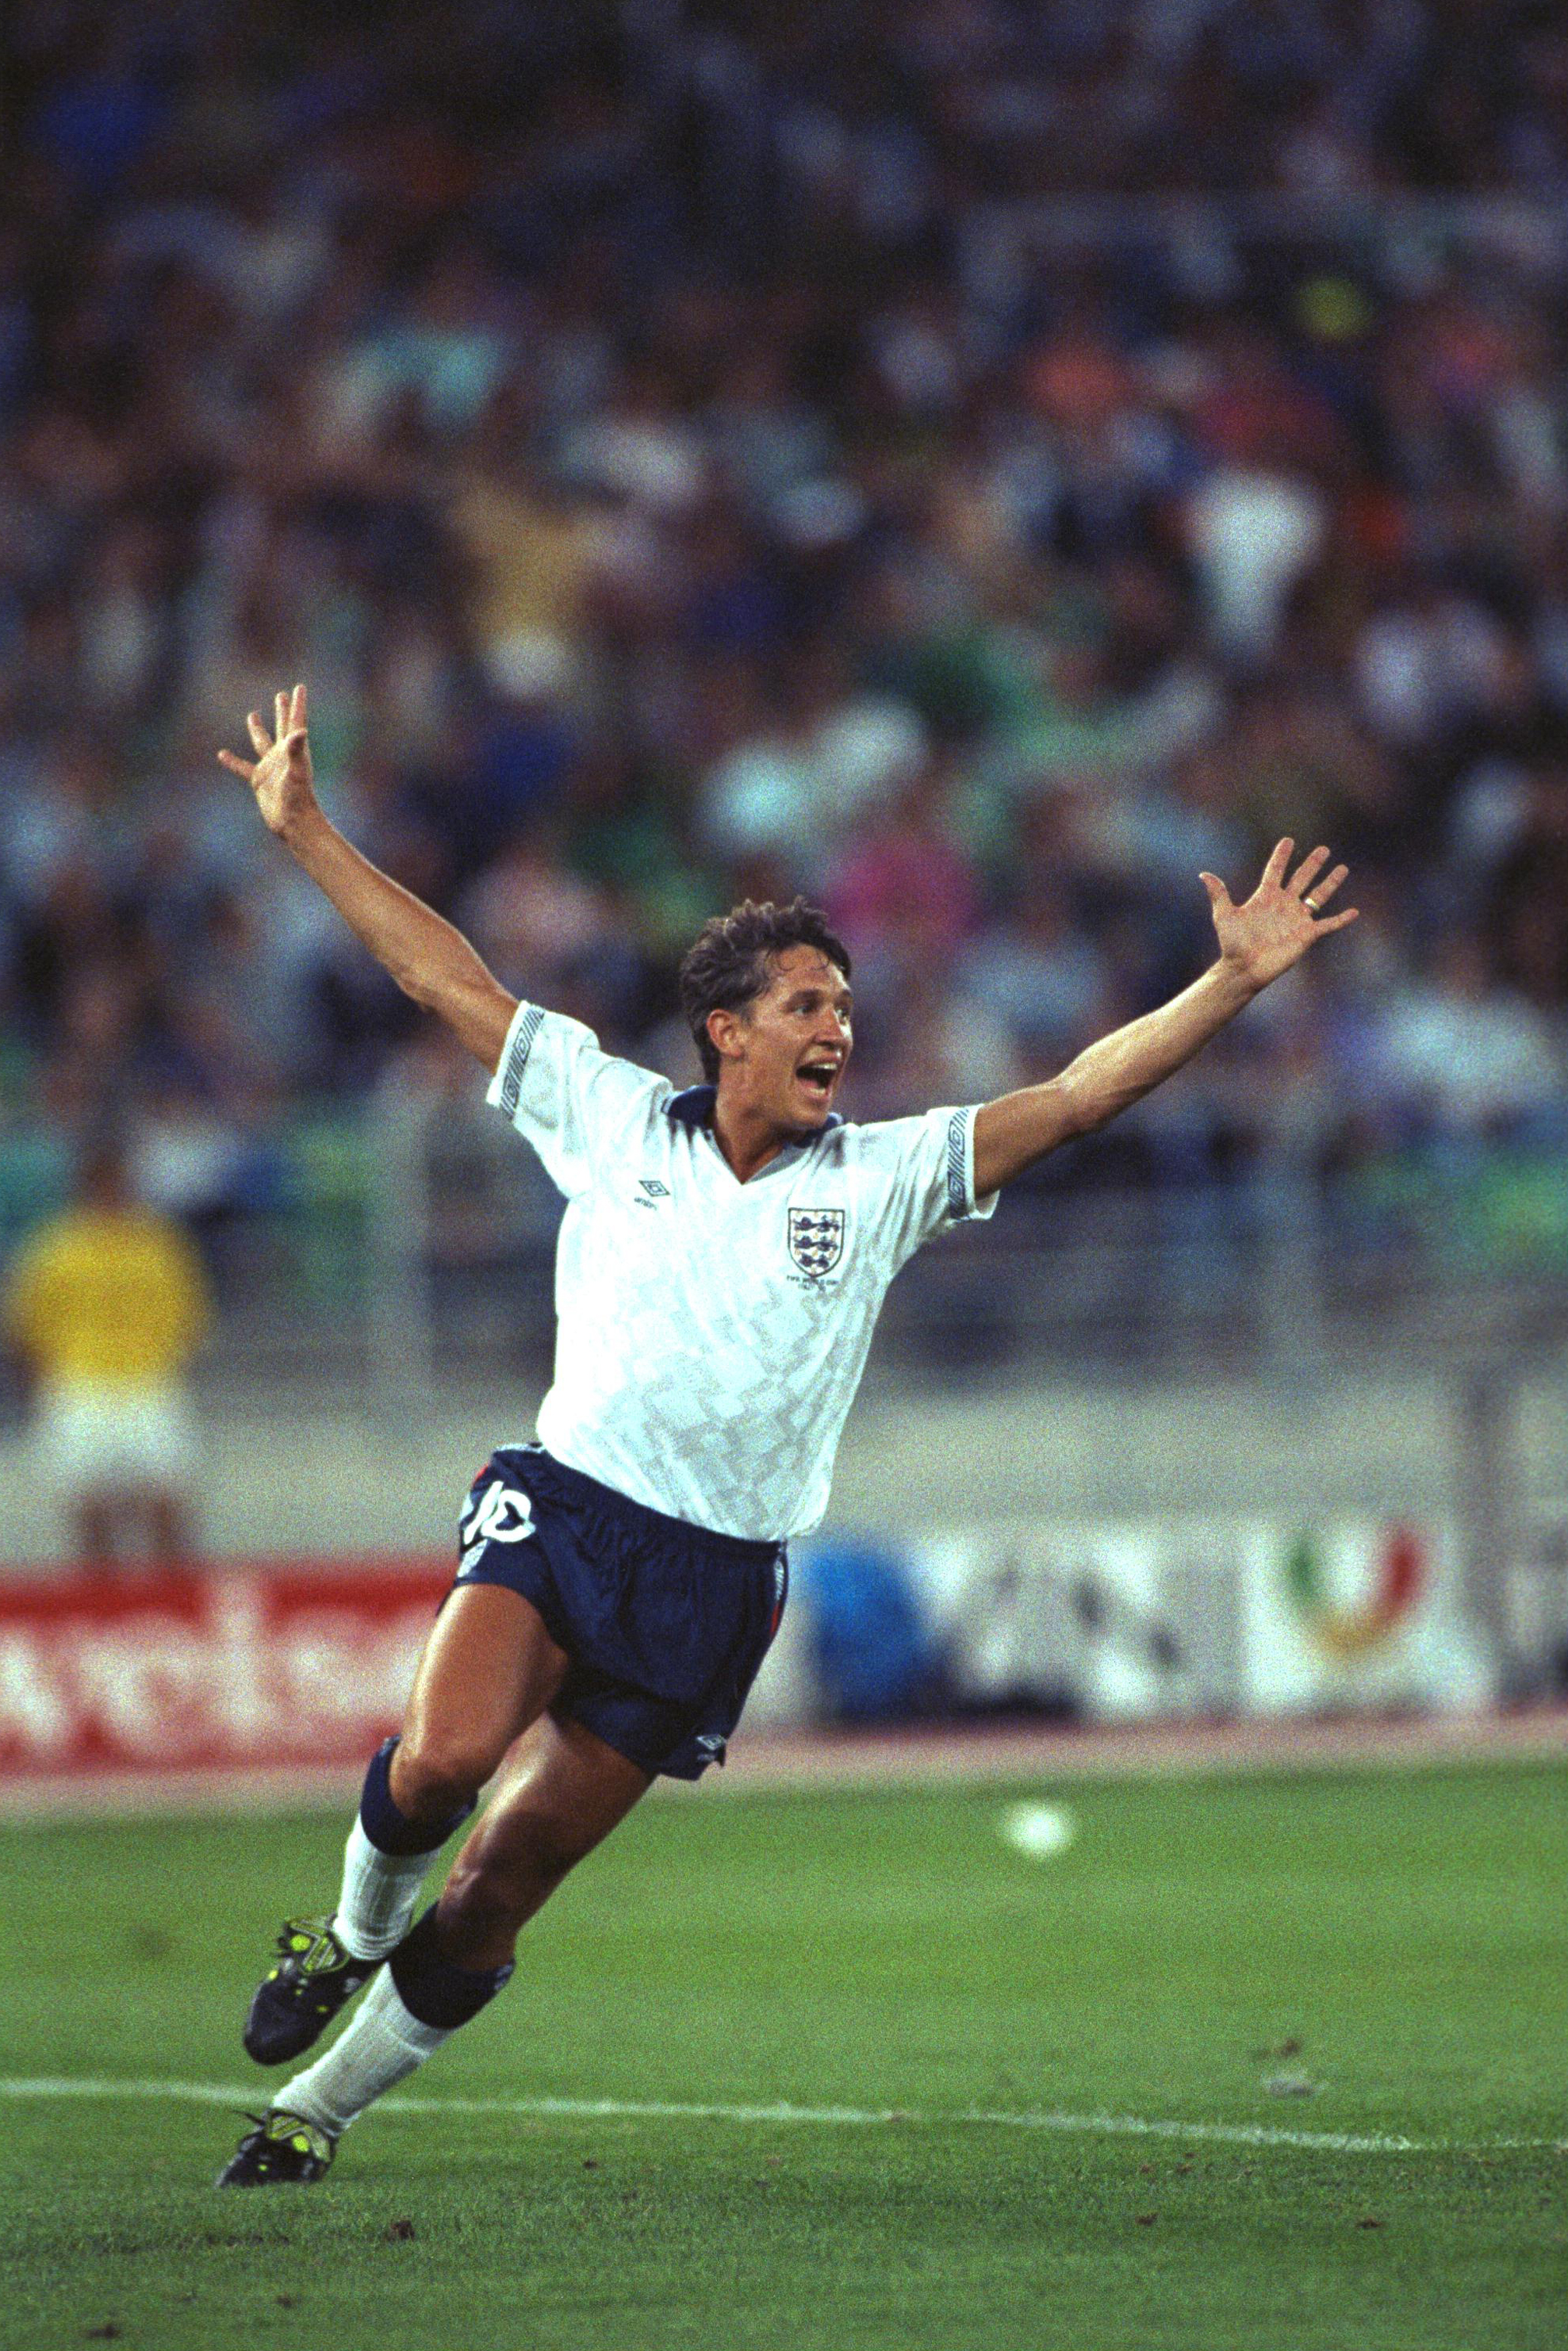 4 JUL 1990:  GARY LINEKER OF ENGLAND CELEBRATES AFTER SCORING THE EQUALISER AGAINST WEST GERMANY IN THEIR WORLD CUP SEMI FINAL MATCH PLAYED IN THE DELLE ALPI STADIUM IN TURIN. THE MATCH WAS A 1-1 DRAW AFTER EXTRA TIME BUT WEST GERMANY WON THE PENALTY SHOO